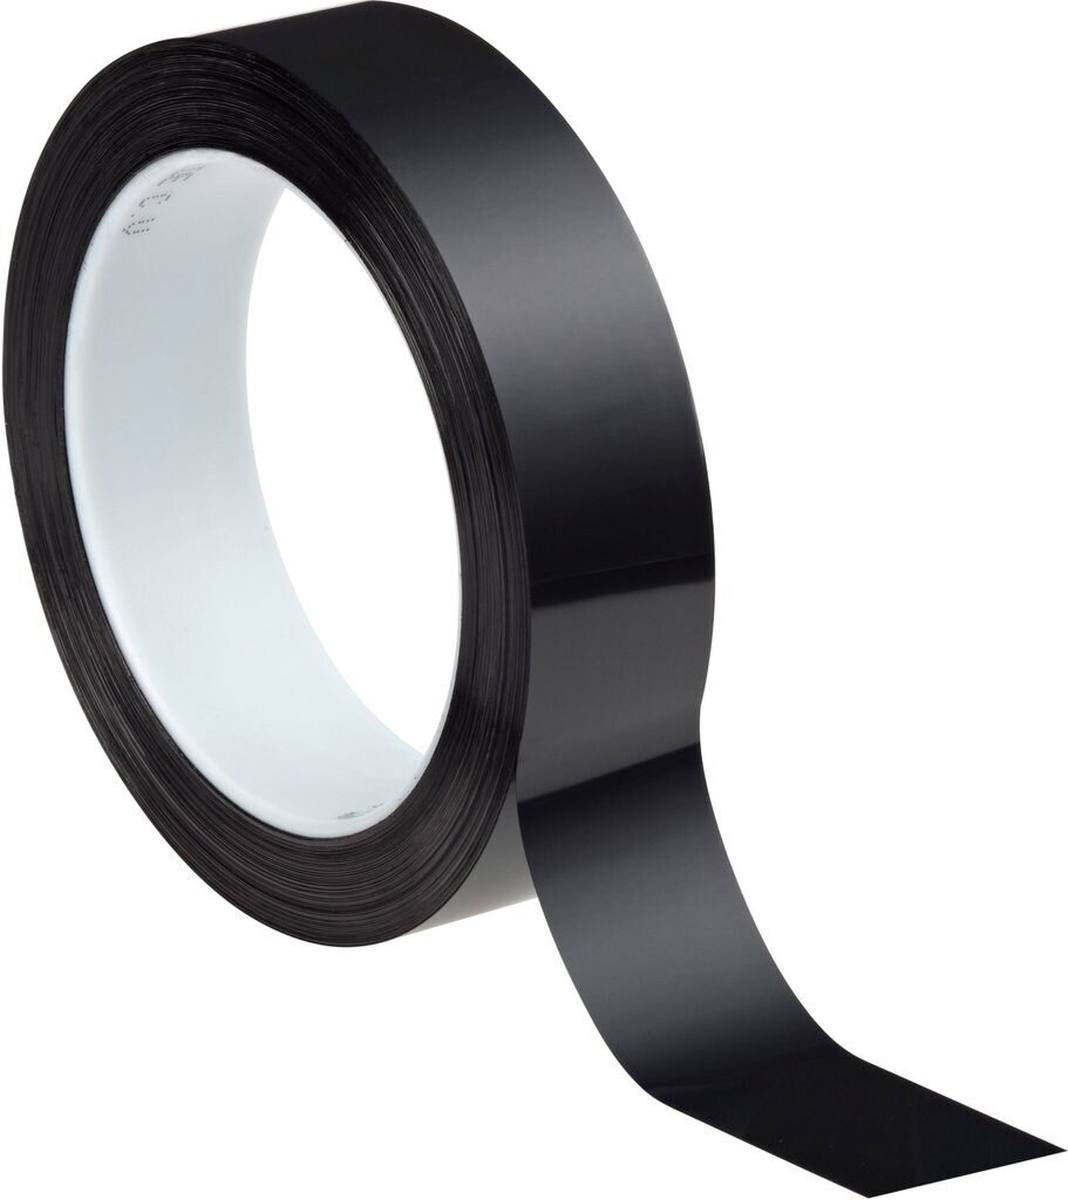 3M polyester adhesive tape 850 T, transparent, 101 mm x 66 m, 0.05 mm